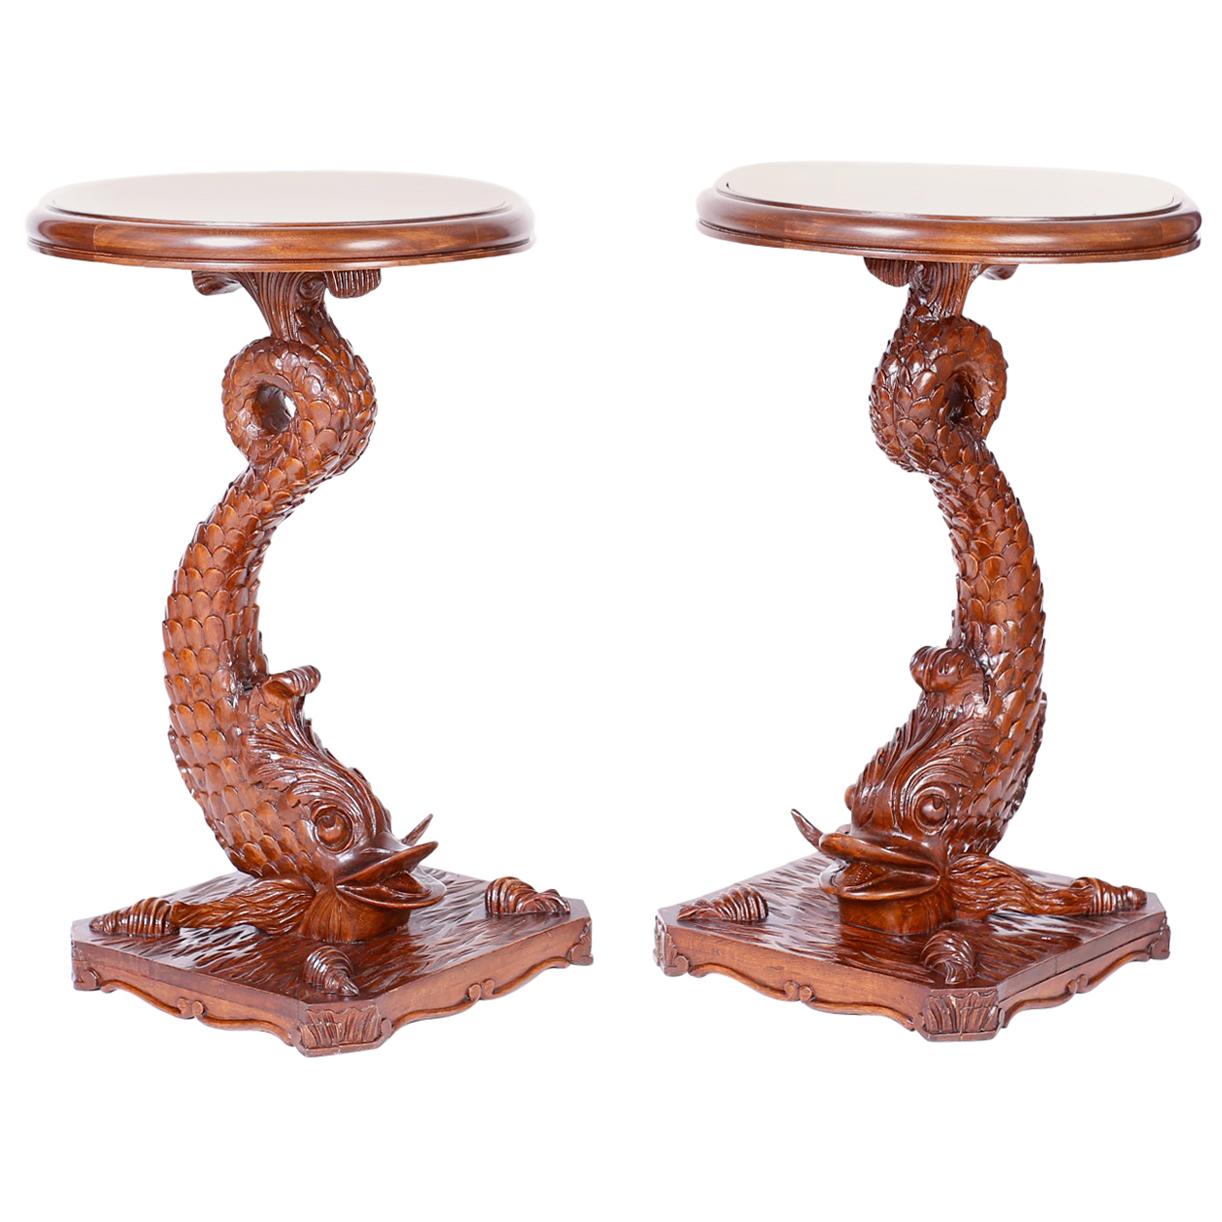 Pair of Antique English Carved Wood Dolphin Stands or Pedestals For Sale